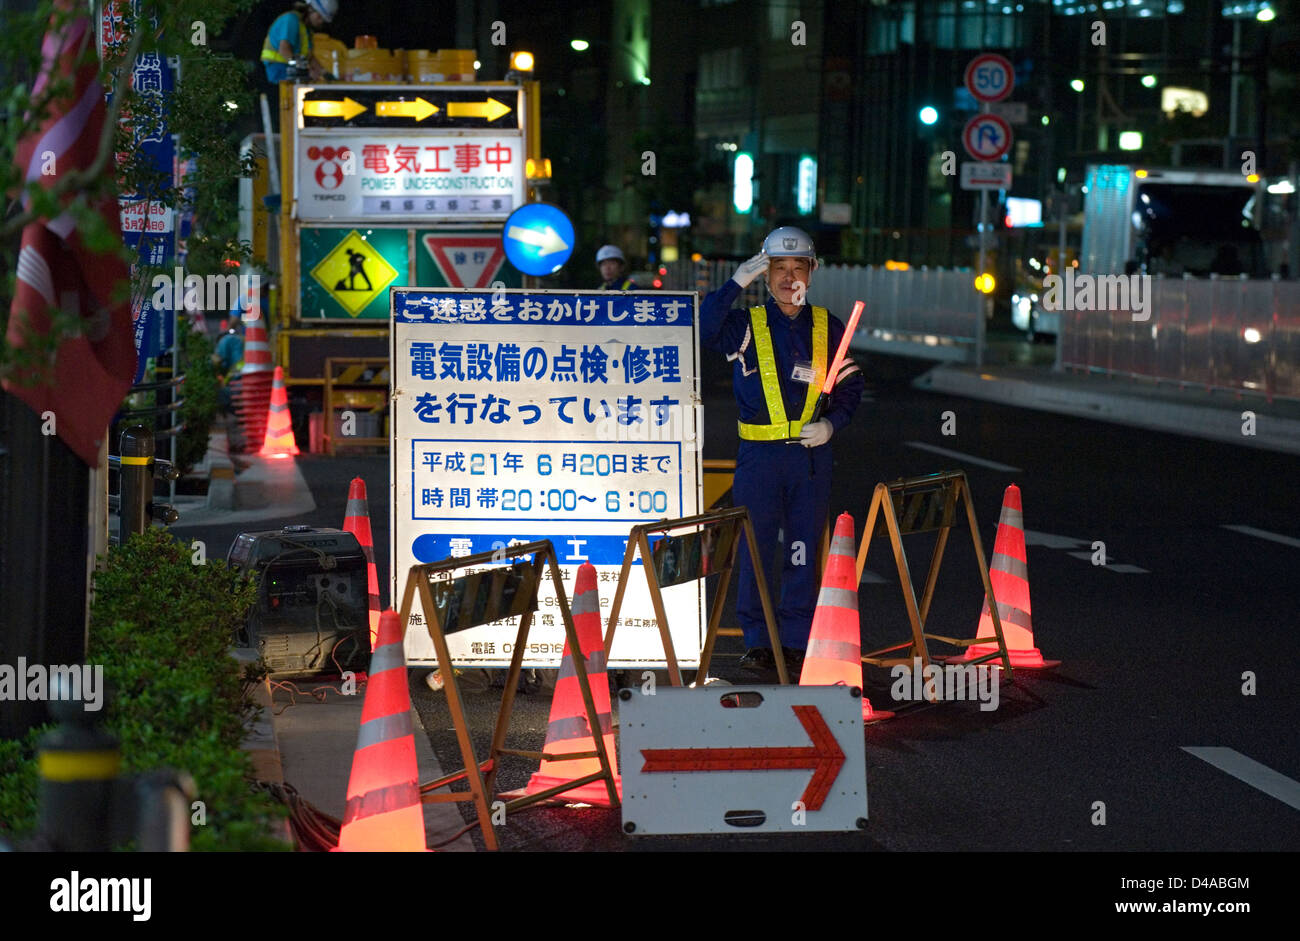 A construction worker flagman salutes as he stands guard over a road repair site on a Tokyo street at night. Stock Photo